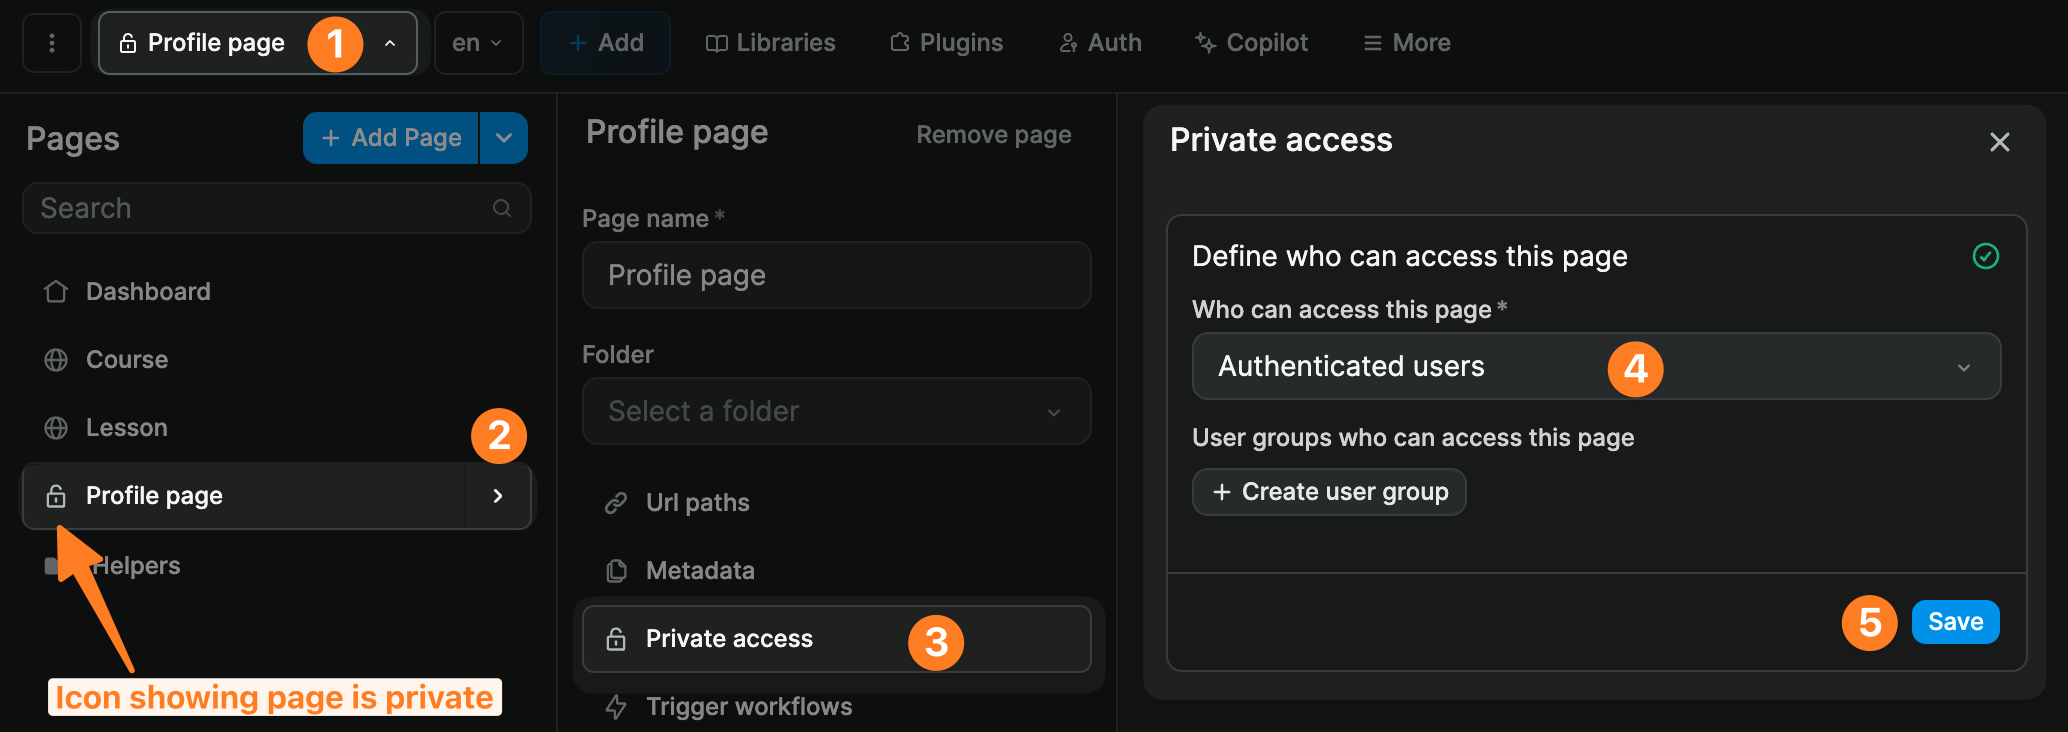 Limit access to authenticated users